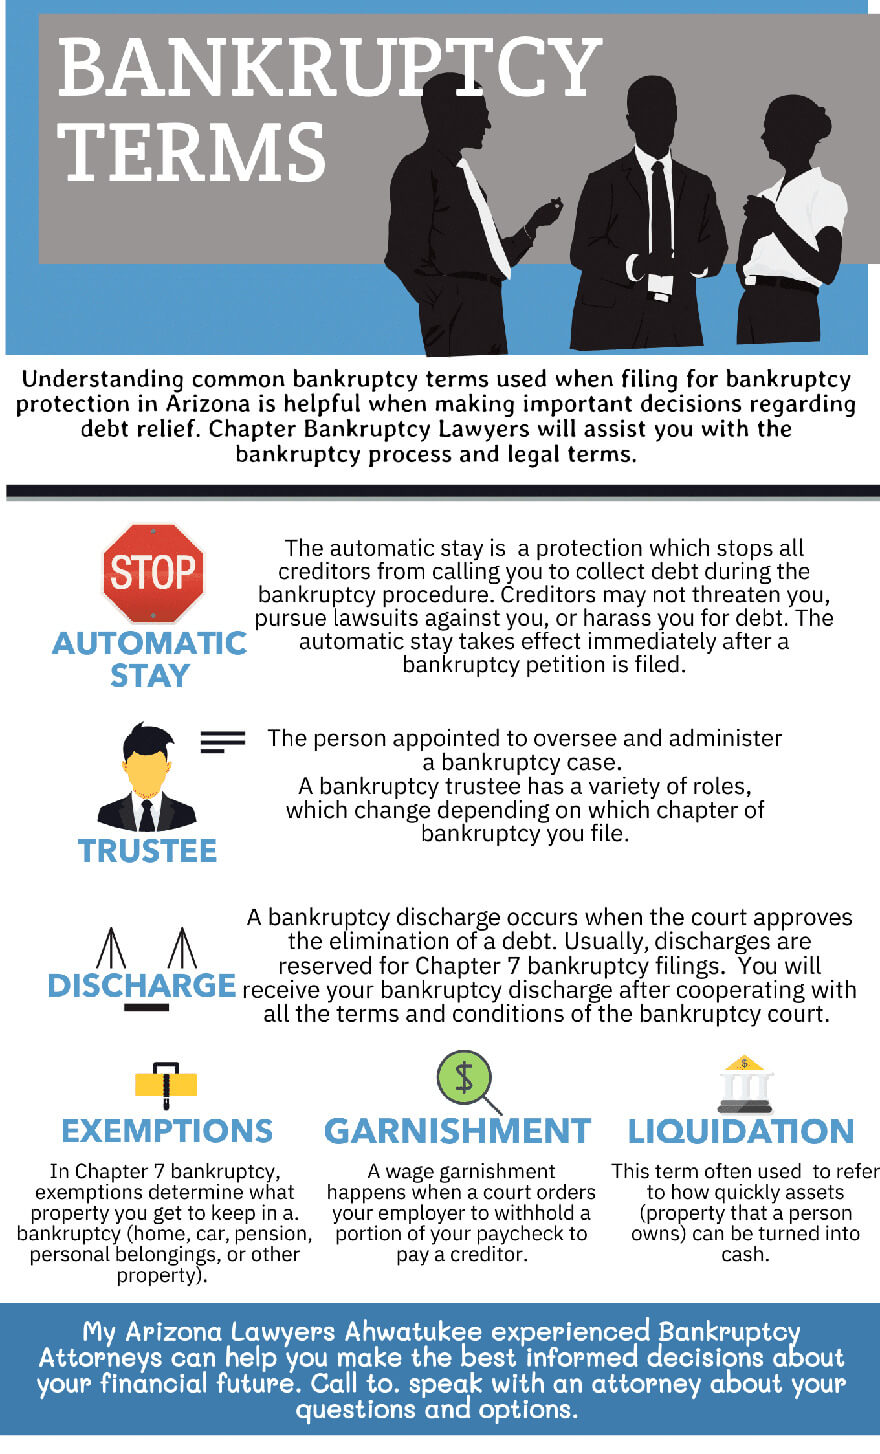 Infographic explaining common bankruptcy terms